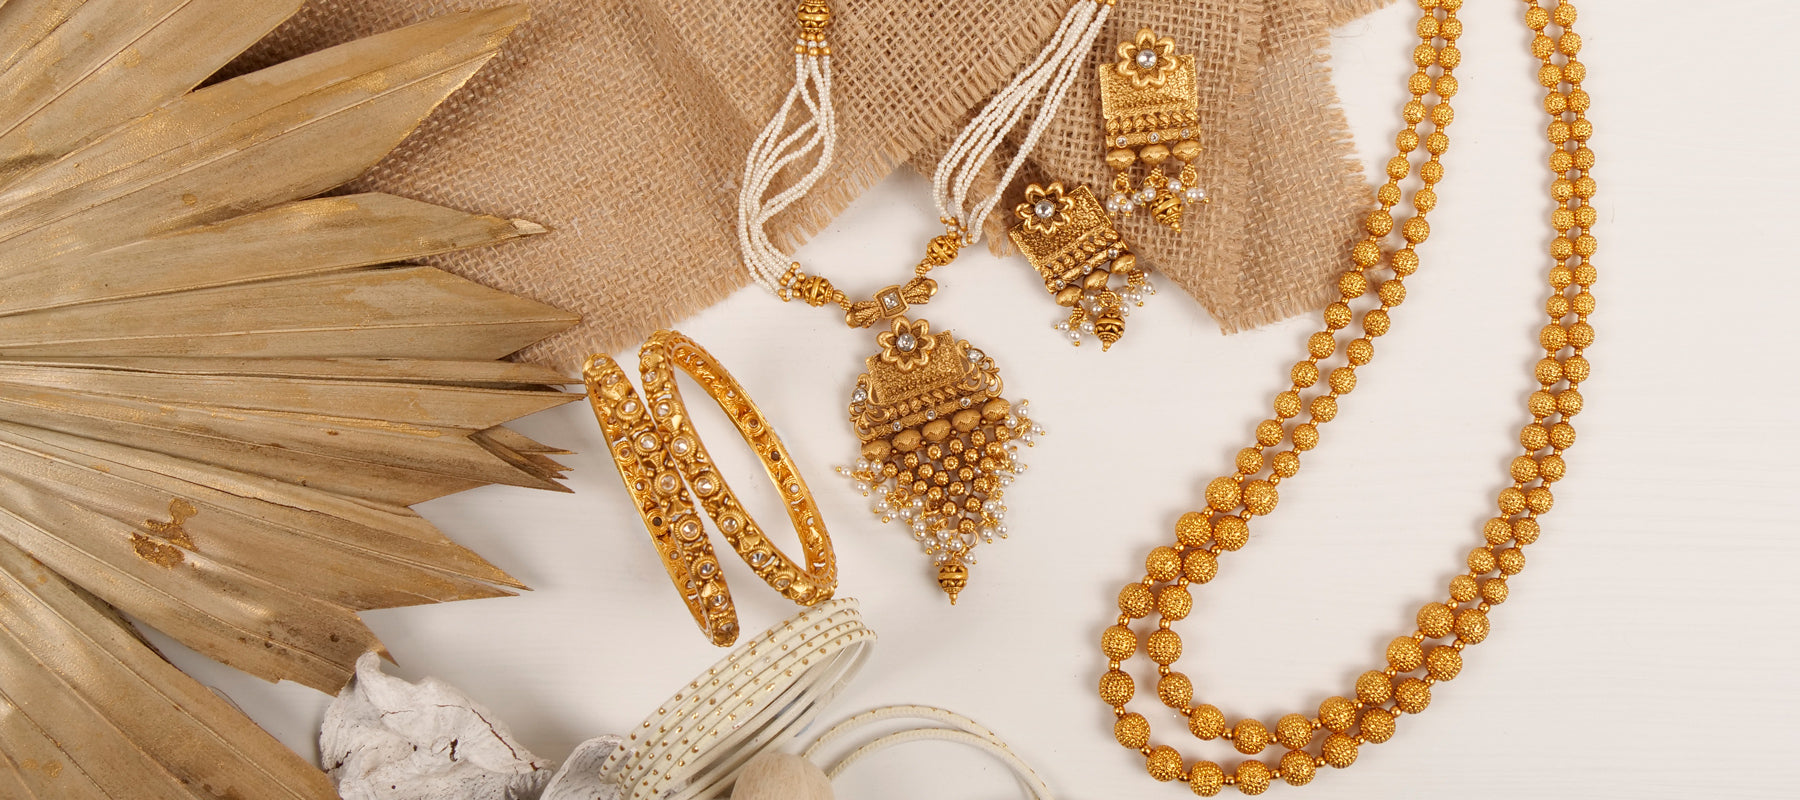 South-Indian Jewellery